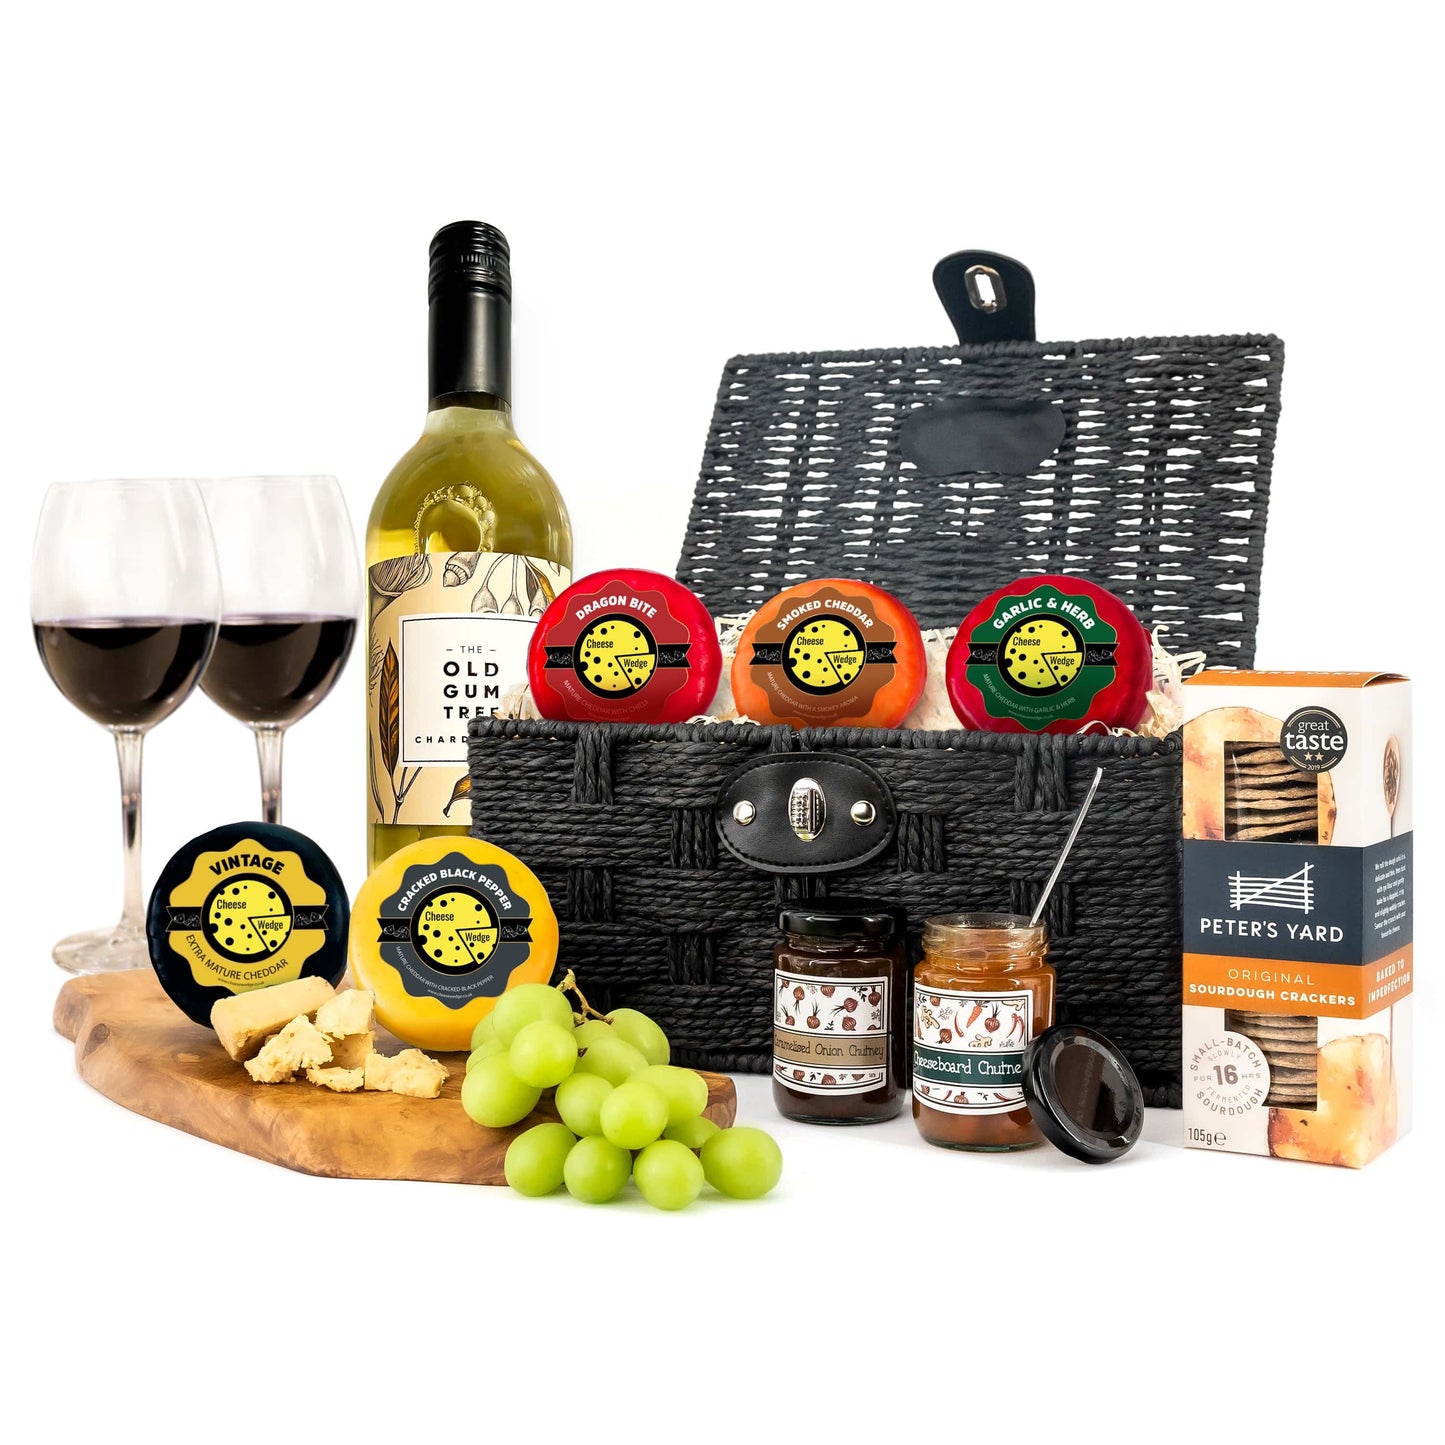 Presented in a woven black hamper, White Wine Cheese Truckle Hamper contains our best selling white wine, cheeses, chutney and includes a box of Peters Yard Sourdough crackers.